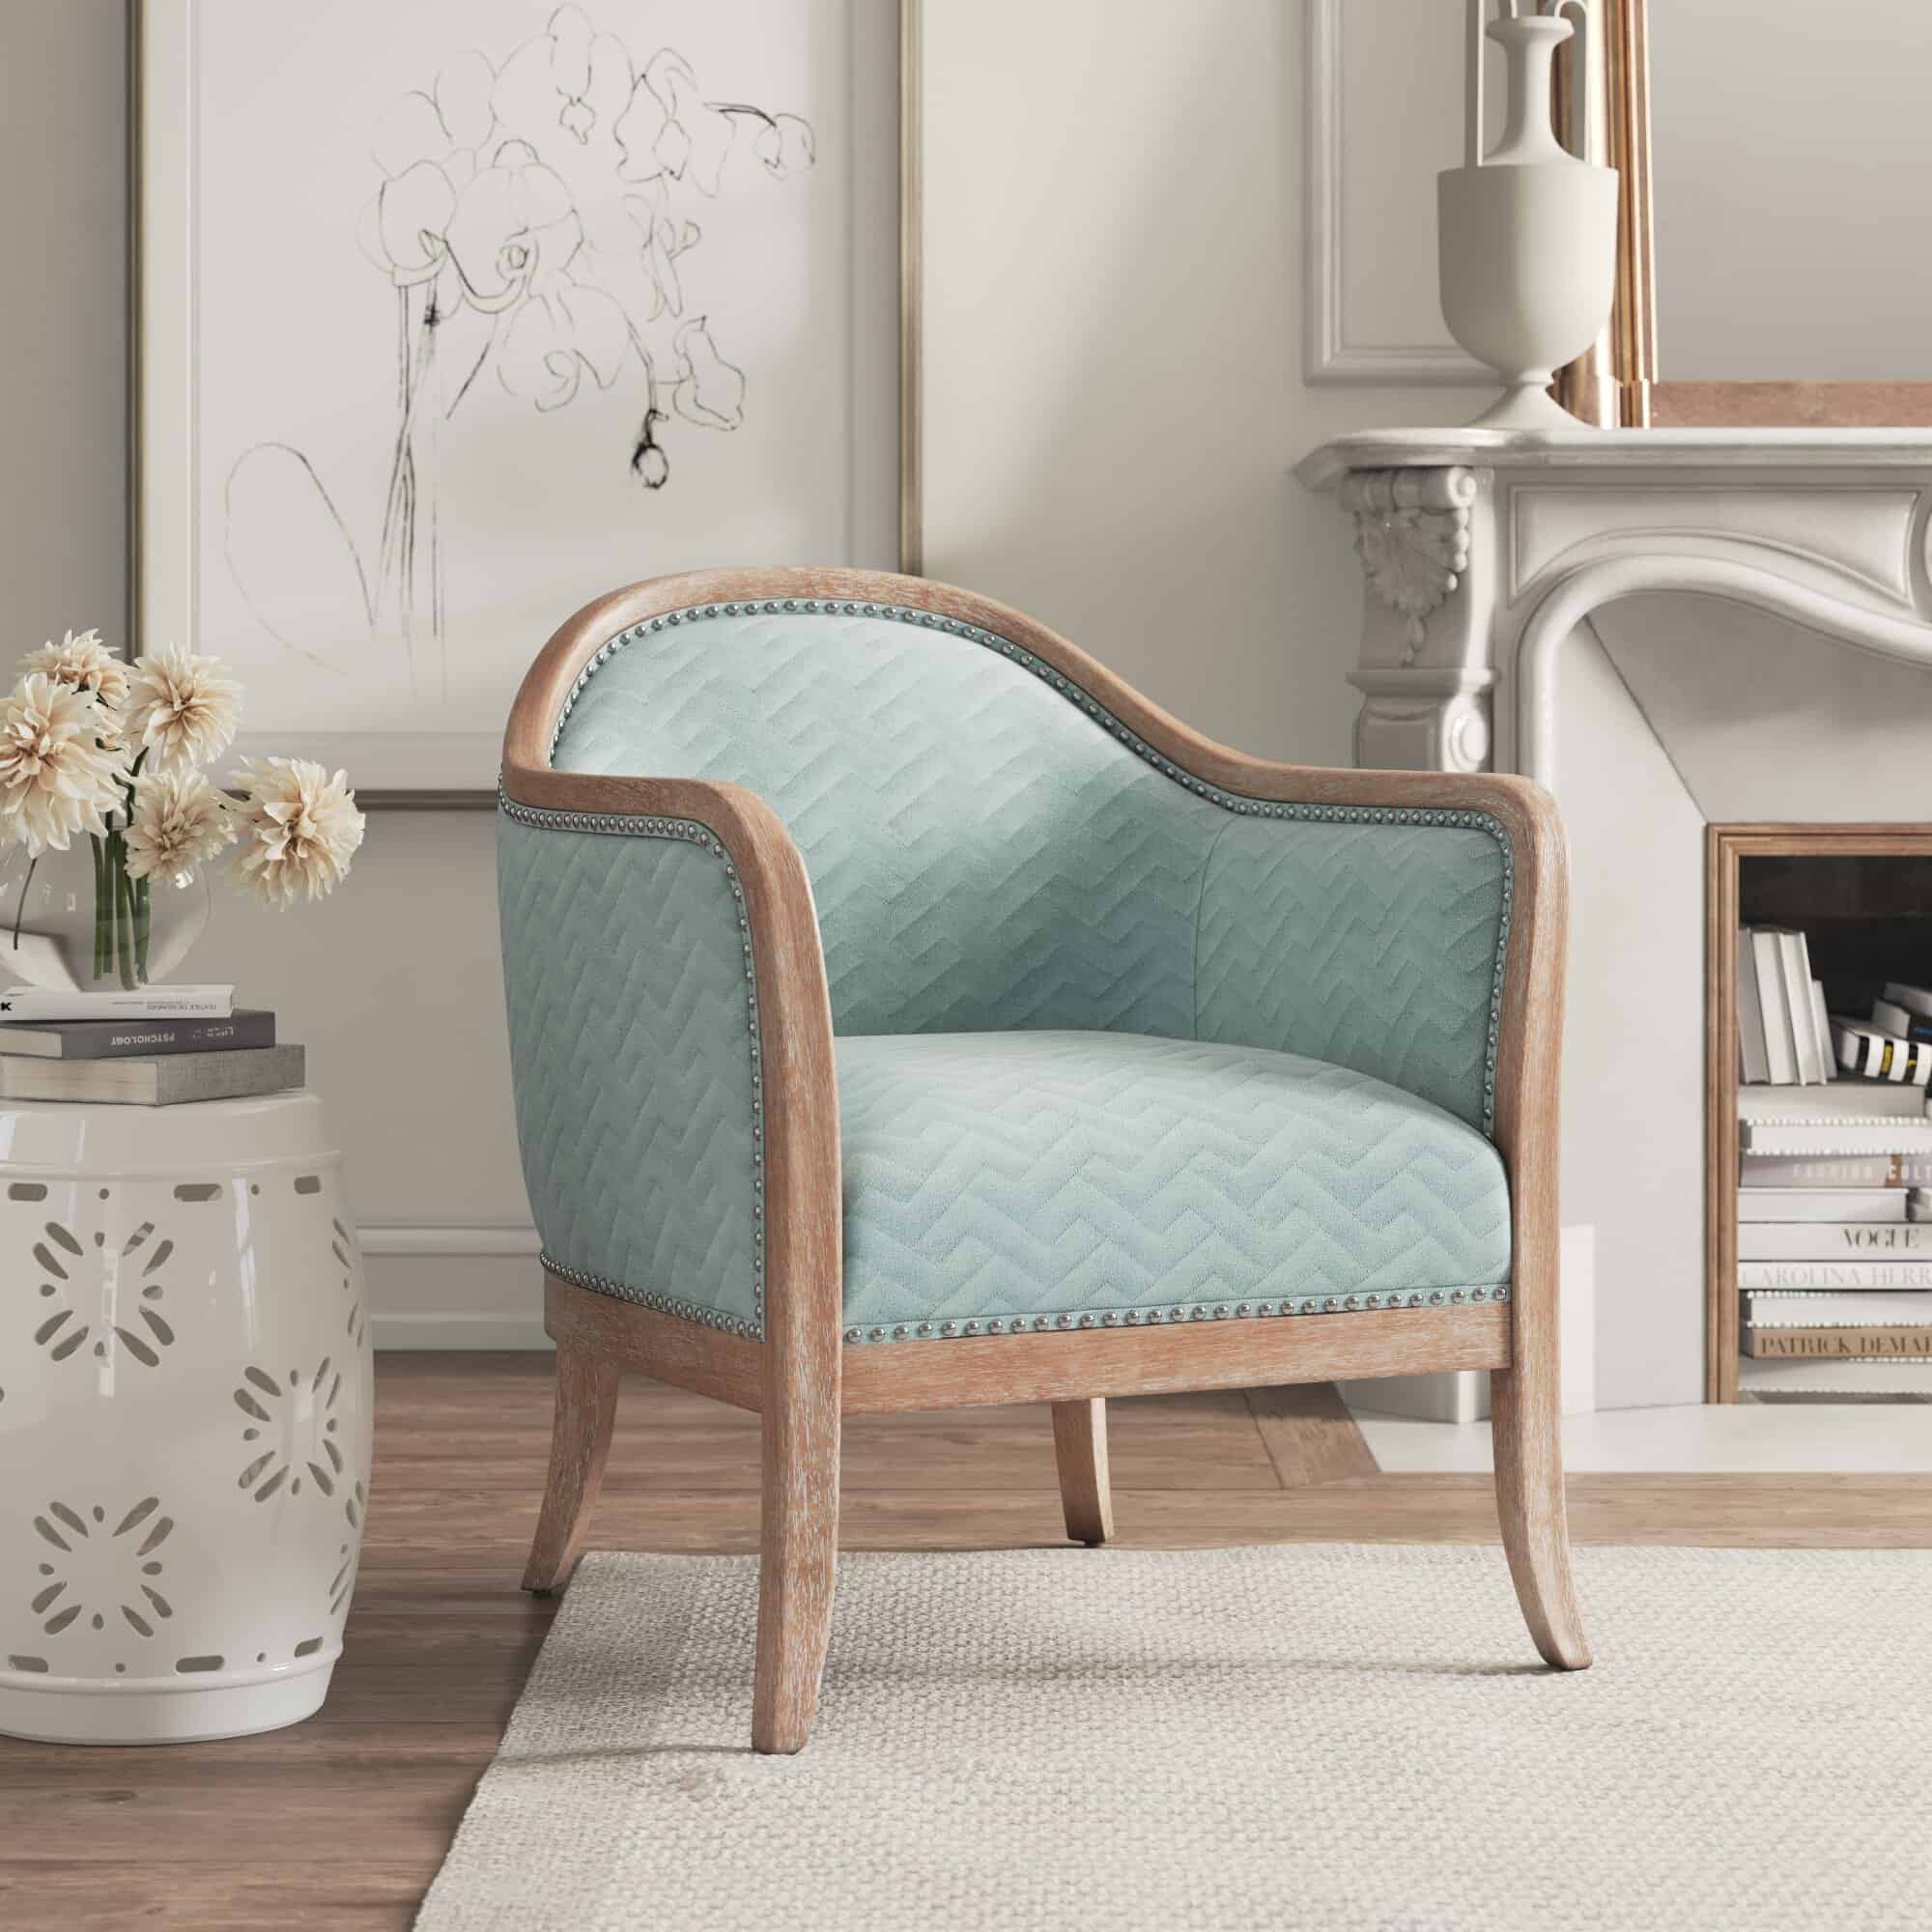 A Light Blue Chair Will Surely Make a Statement